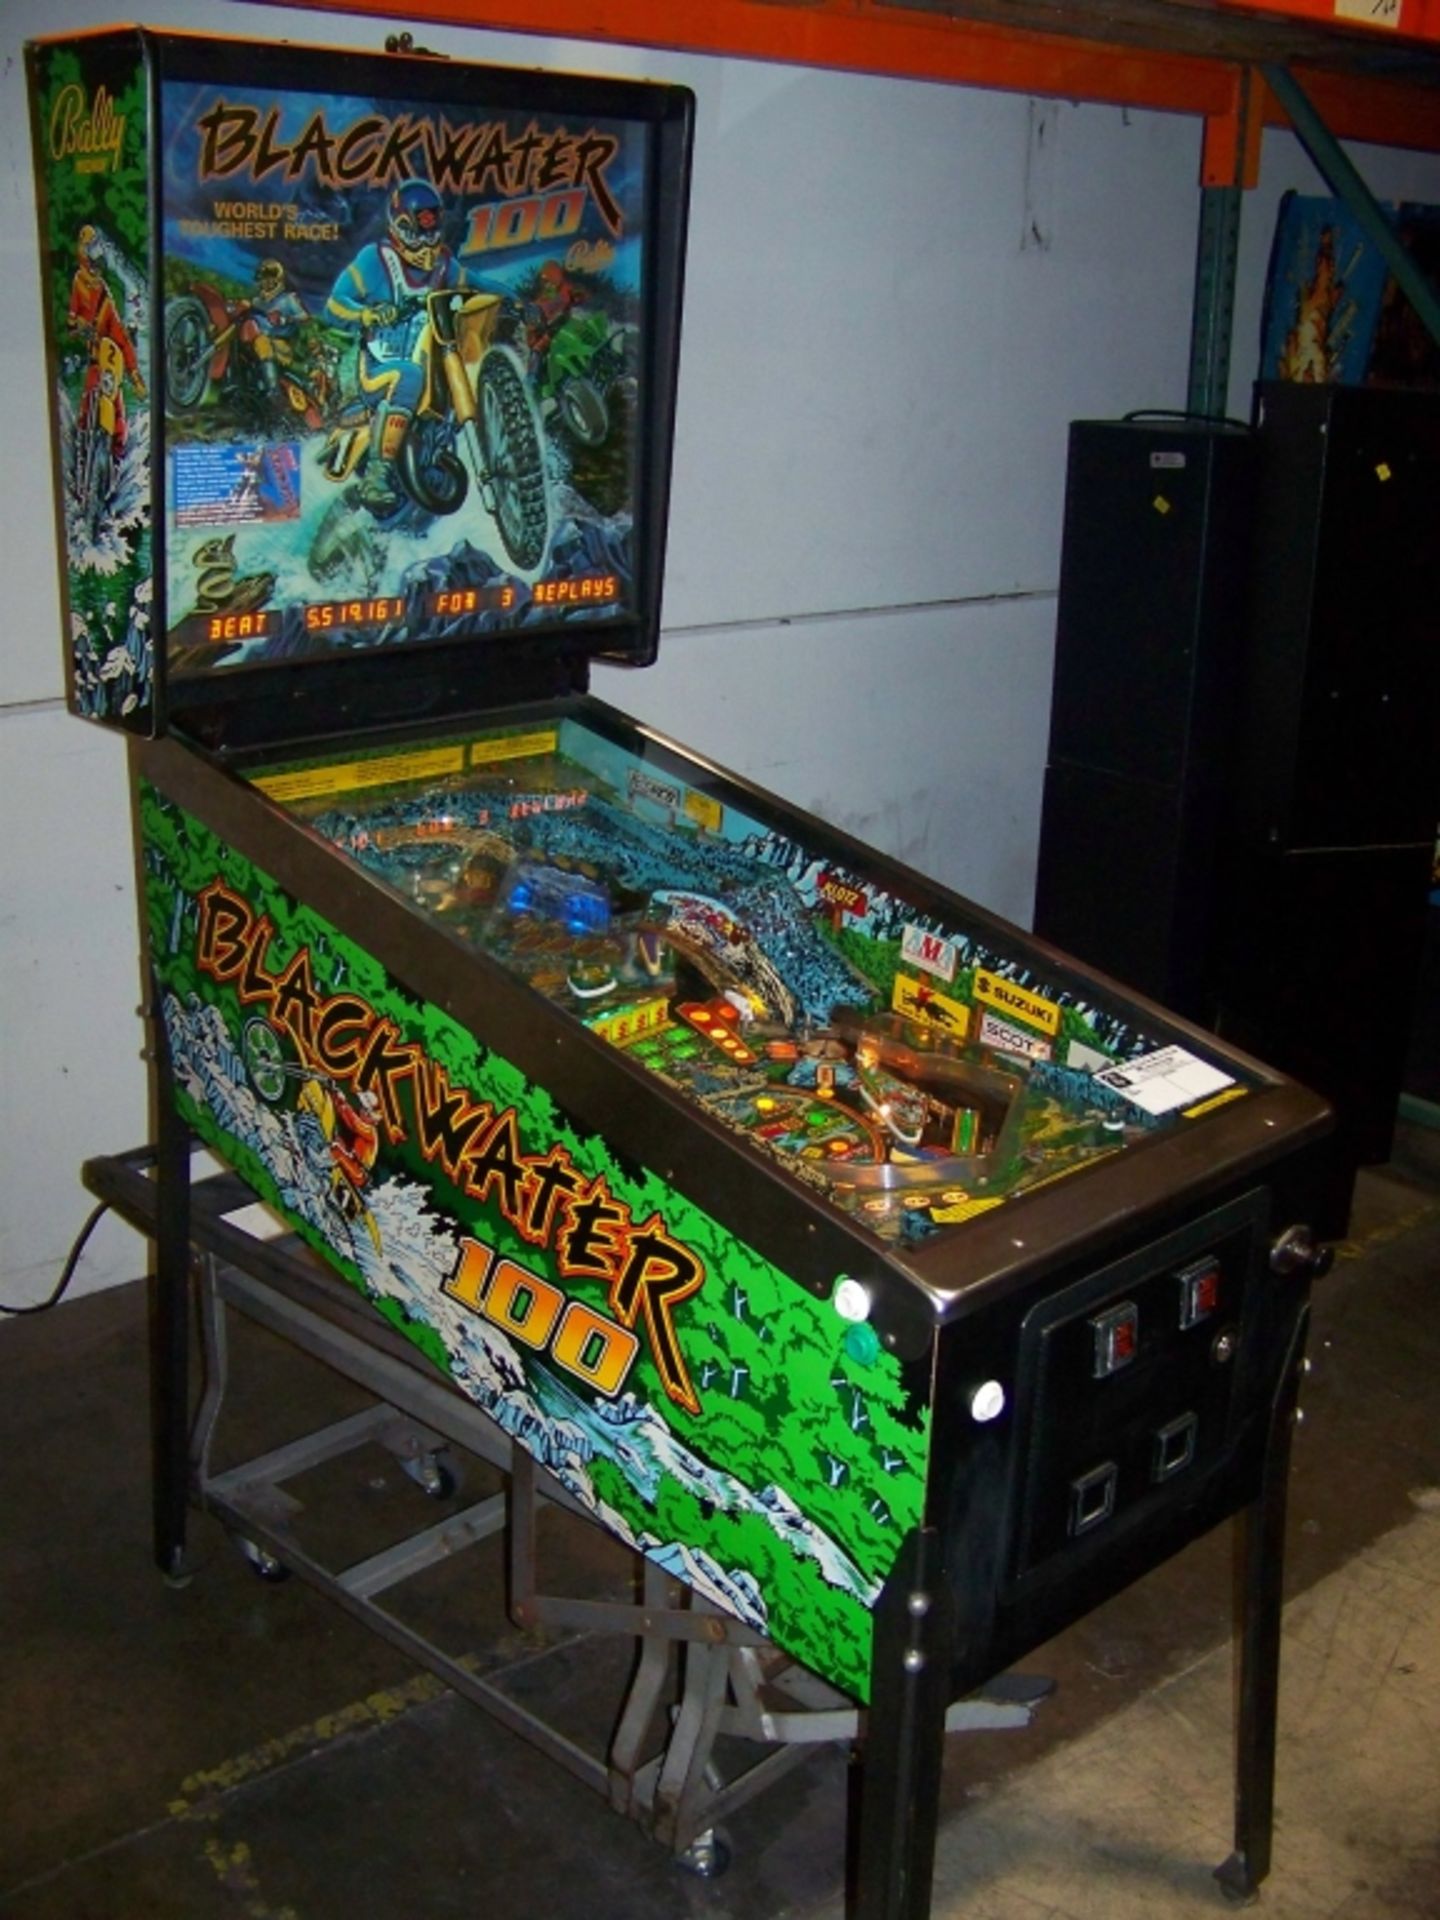 BLACKWATER 100 PINBALL MACHINE BALLY 1988 Item is in used condition. Evidence of wear and commercial